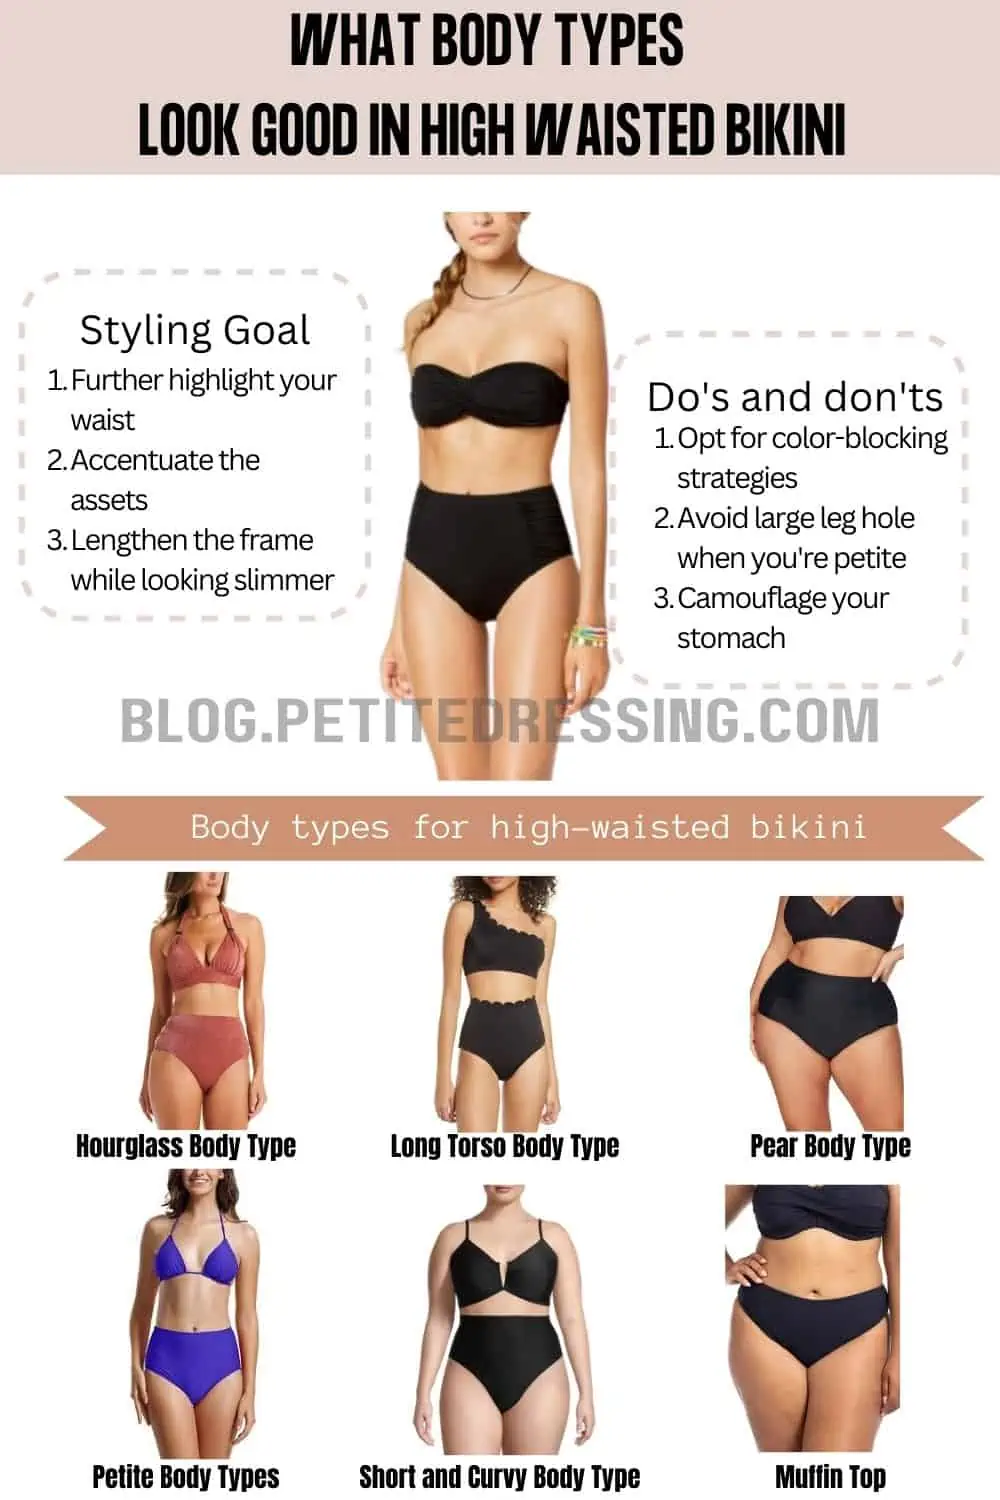 Best Bathing Suits for Each Body Type - Petite Dressing